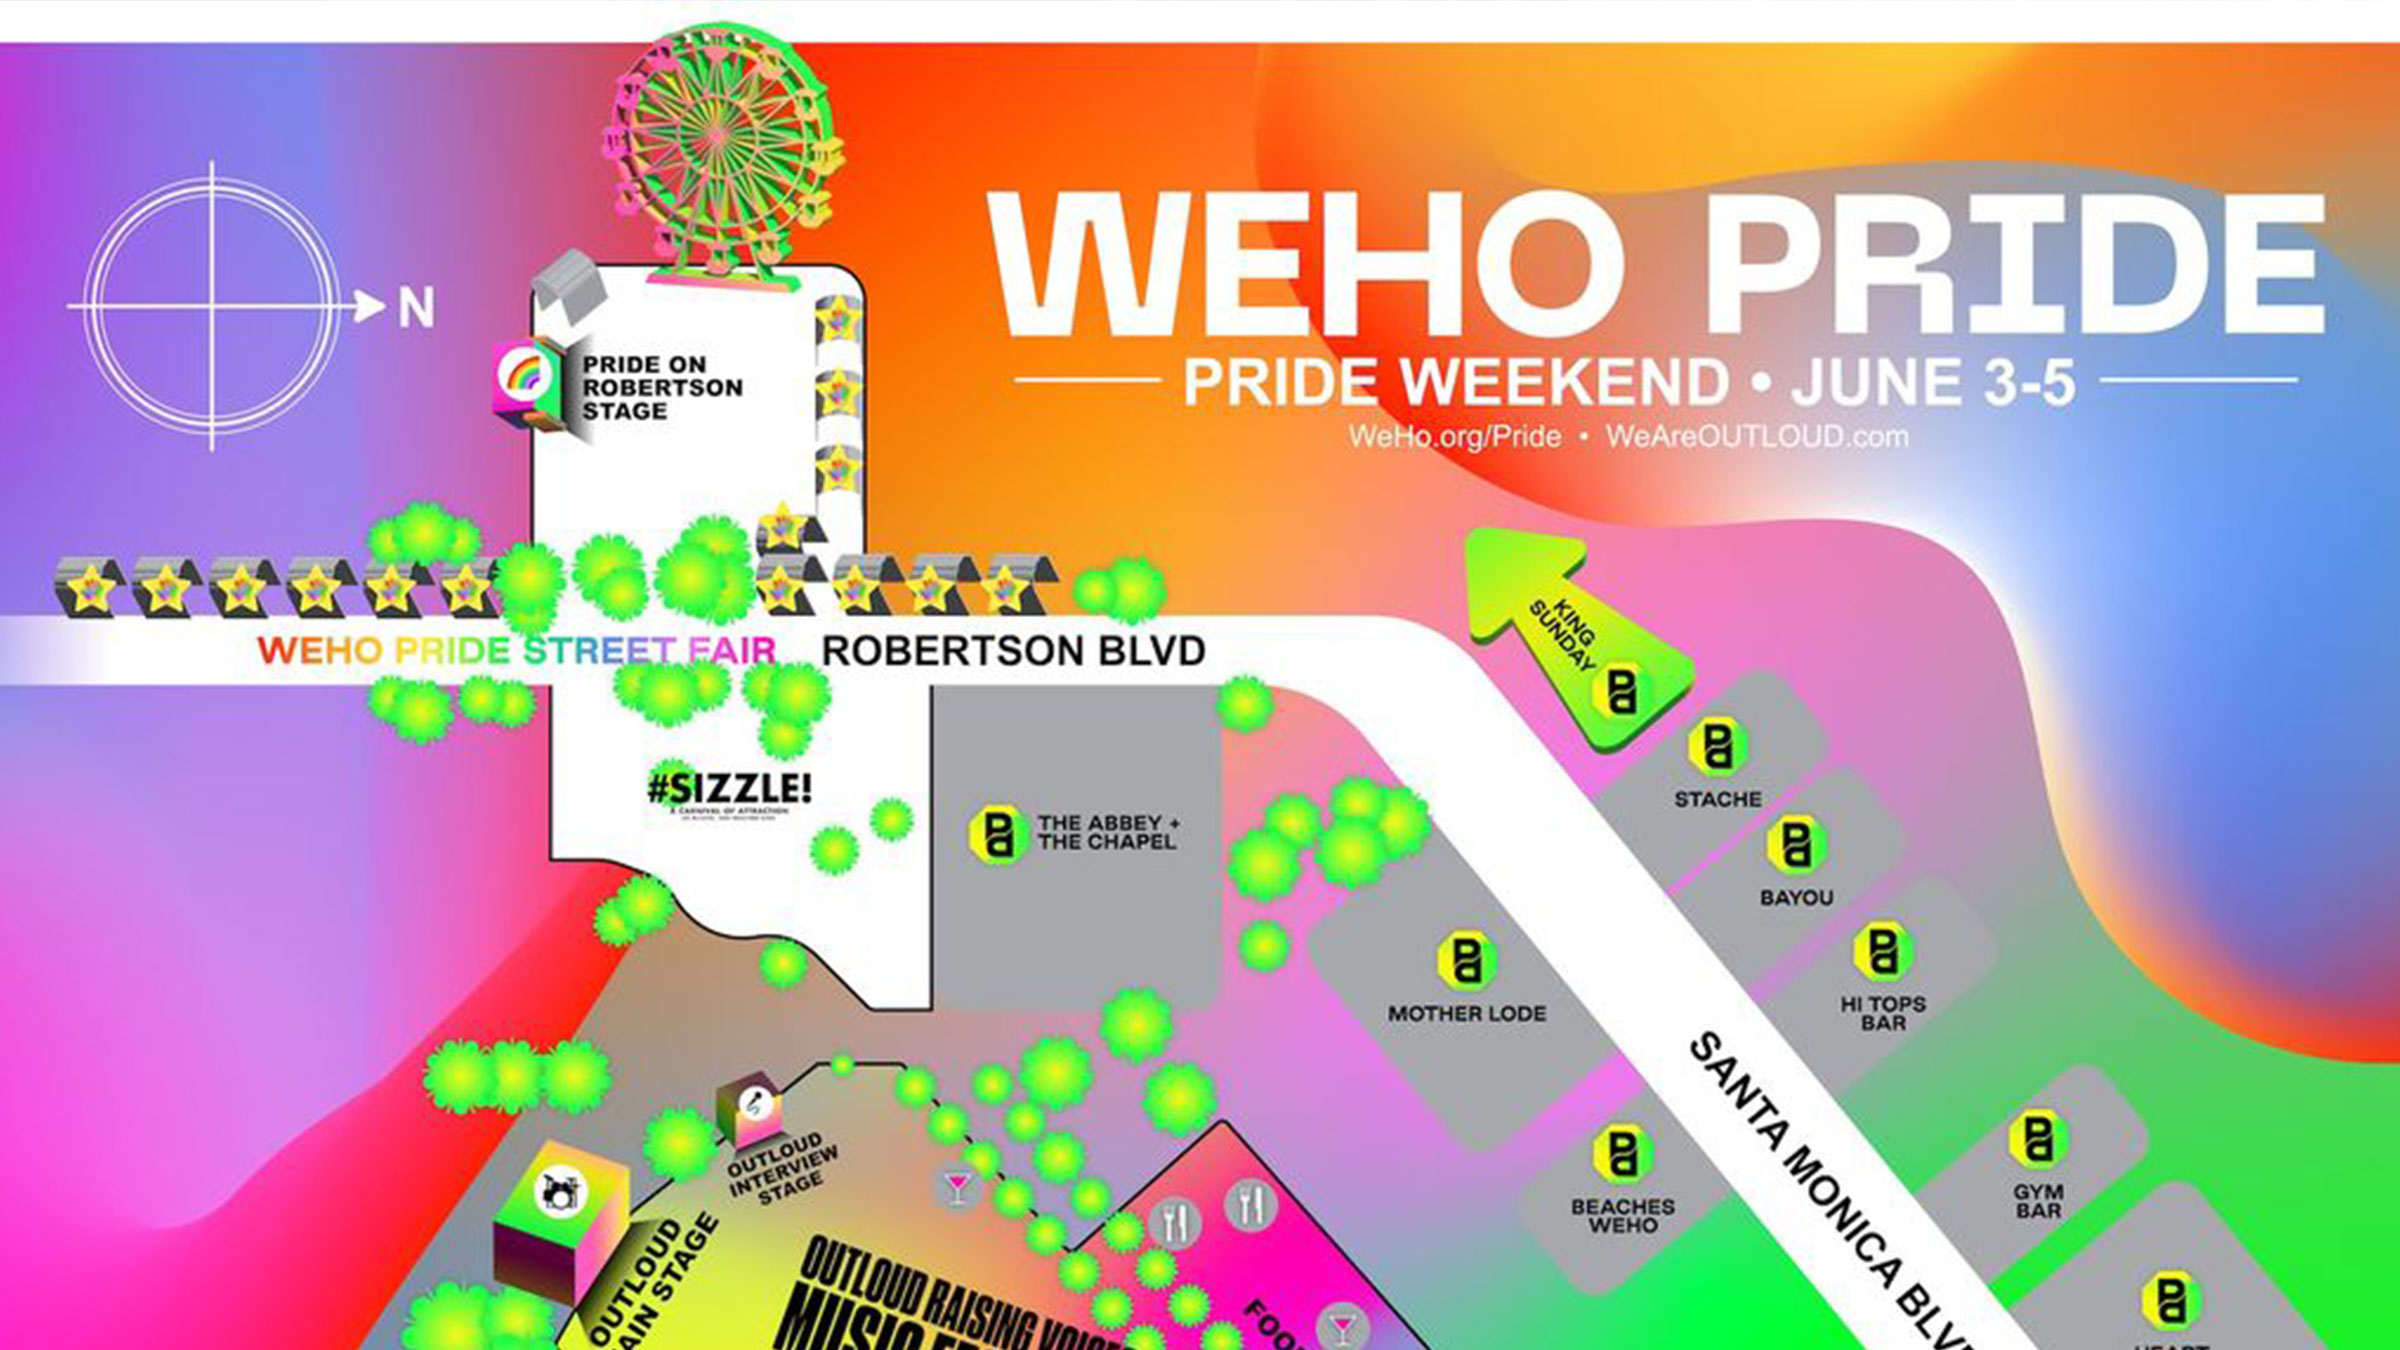 Check out the WeHo Pride map